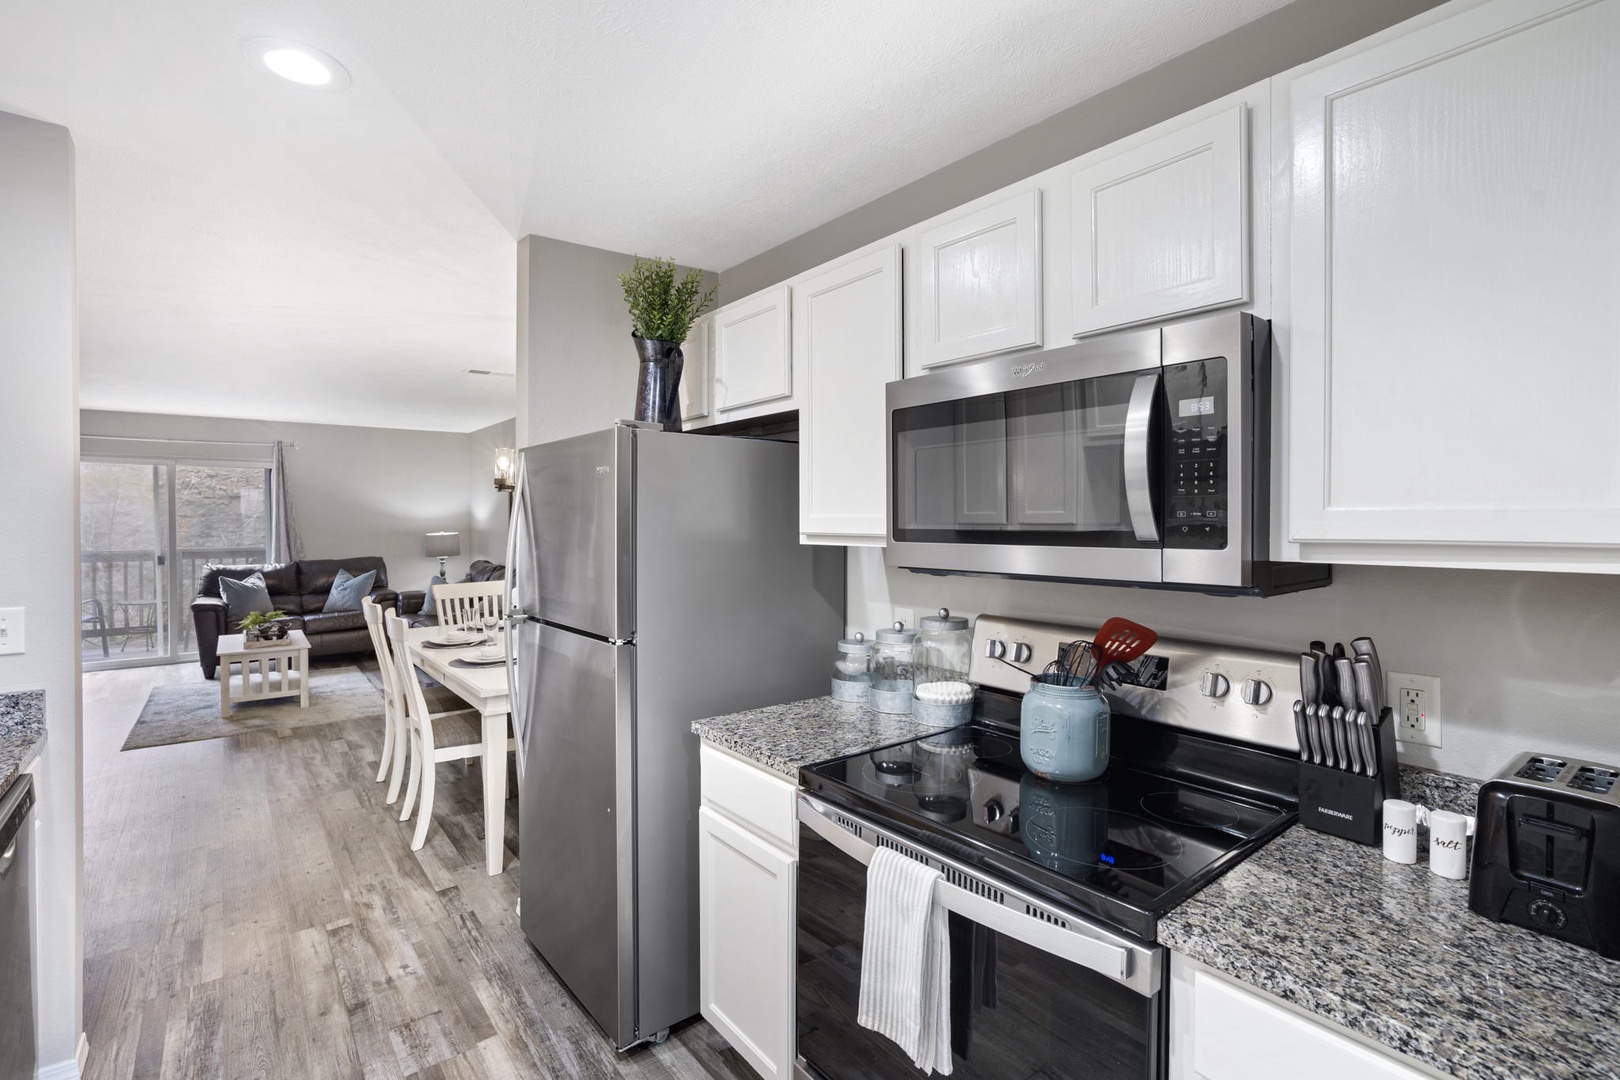 Full kitchen with stainless-steel appliances (Unit #4)